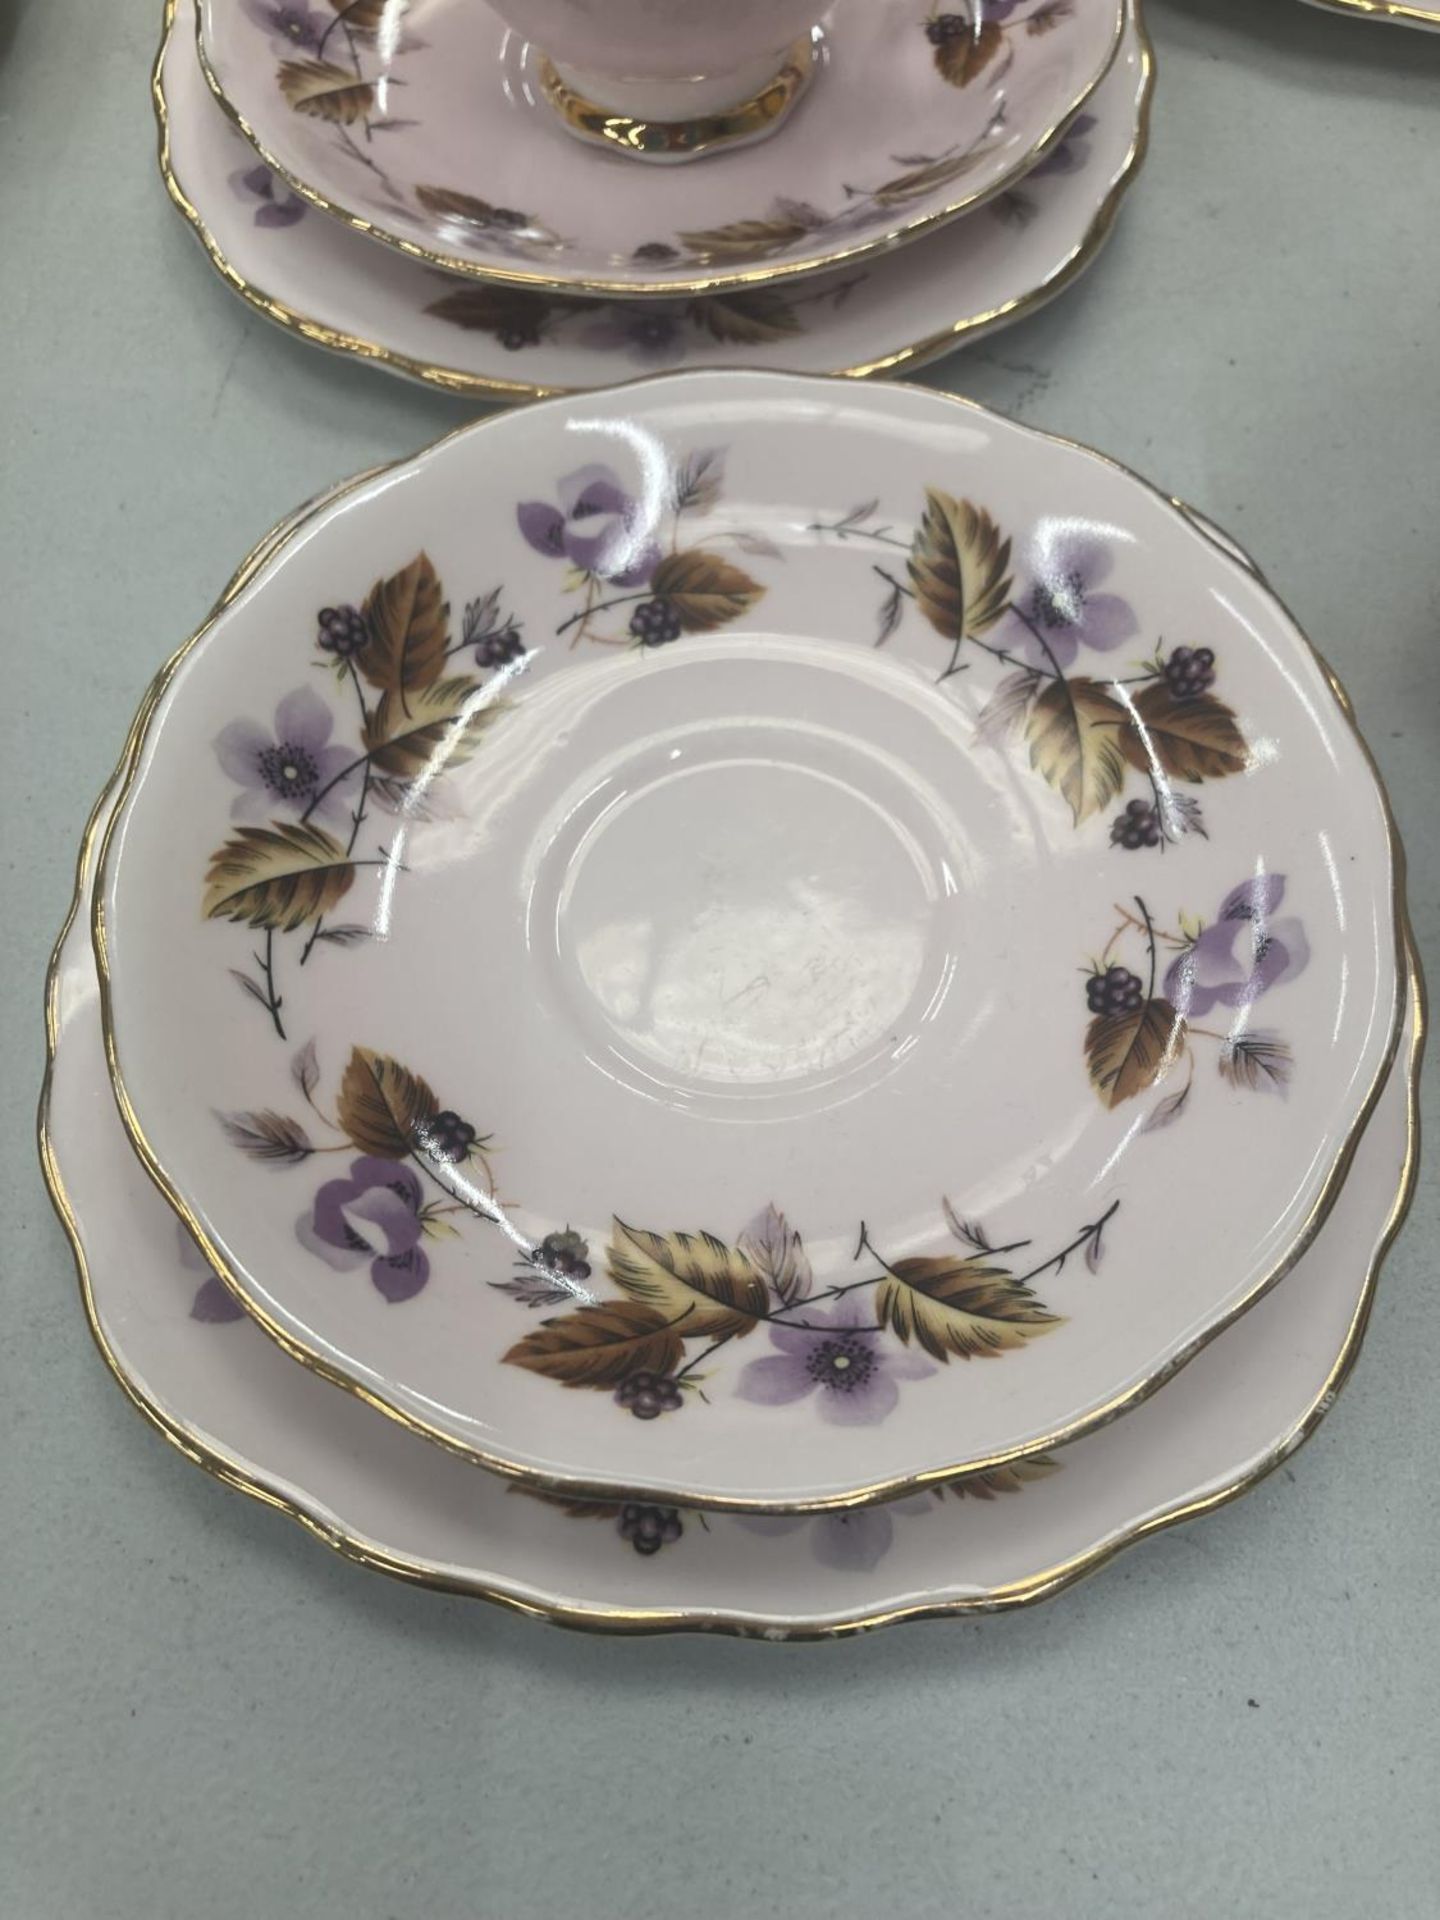 FIVE COLCLOUGH TRIOS IN LILAC WITH BLACKBERRY PATTERN PLUS A CUP AND SAUCER - Image 3 of 4